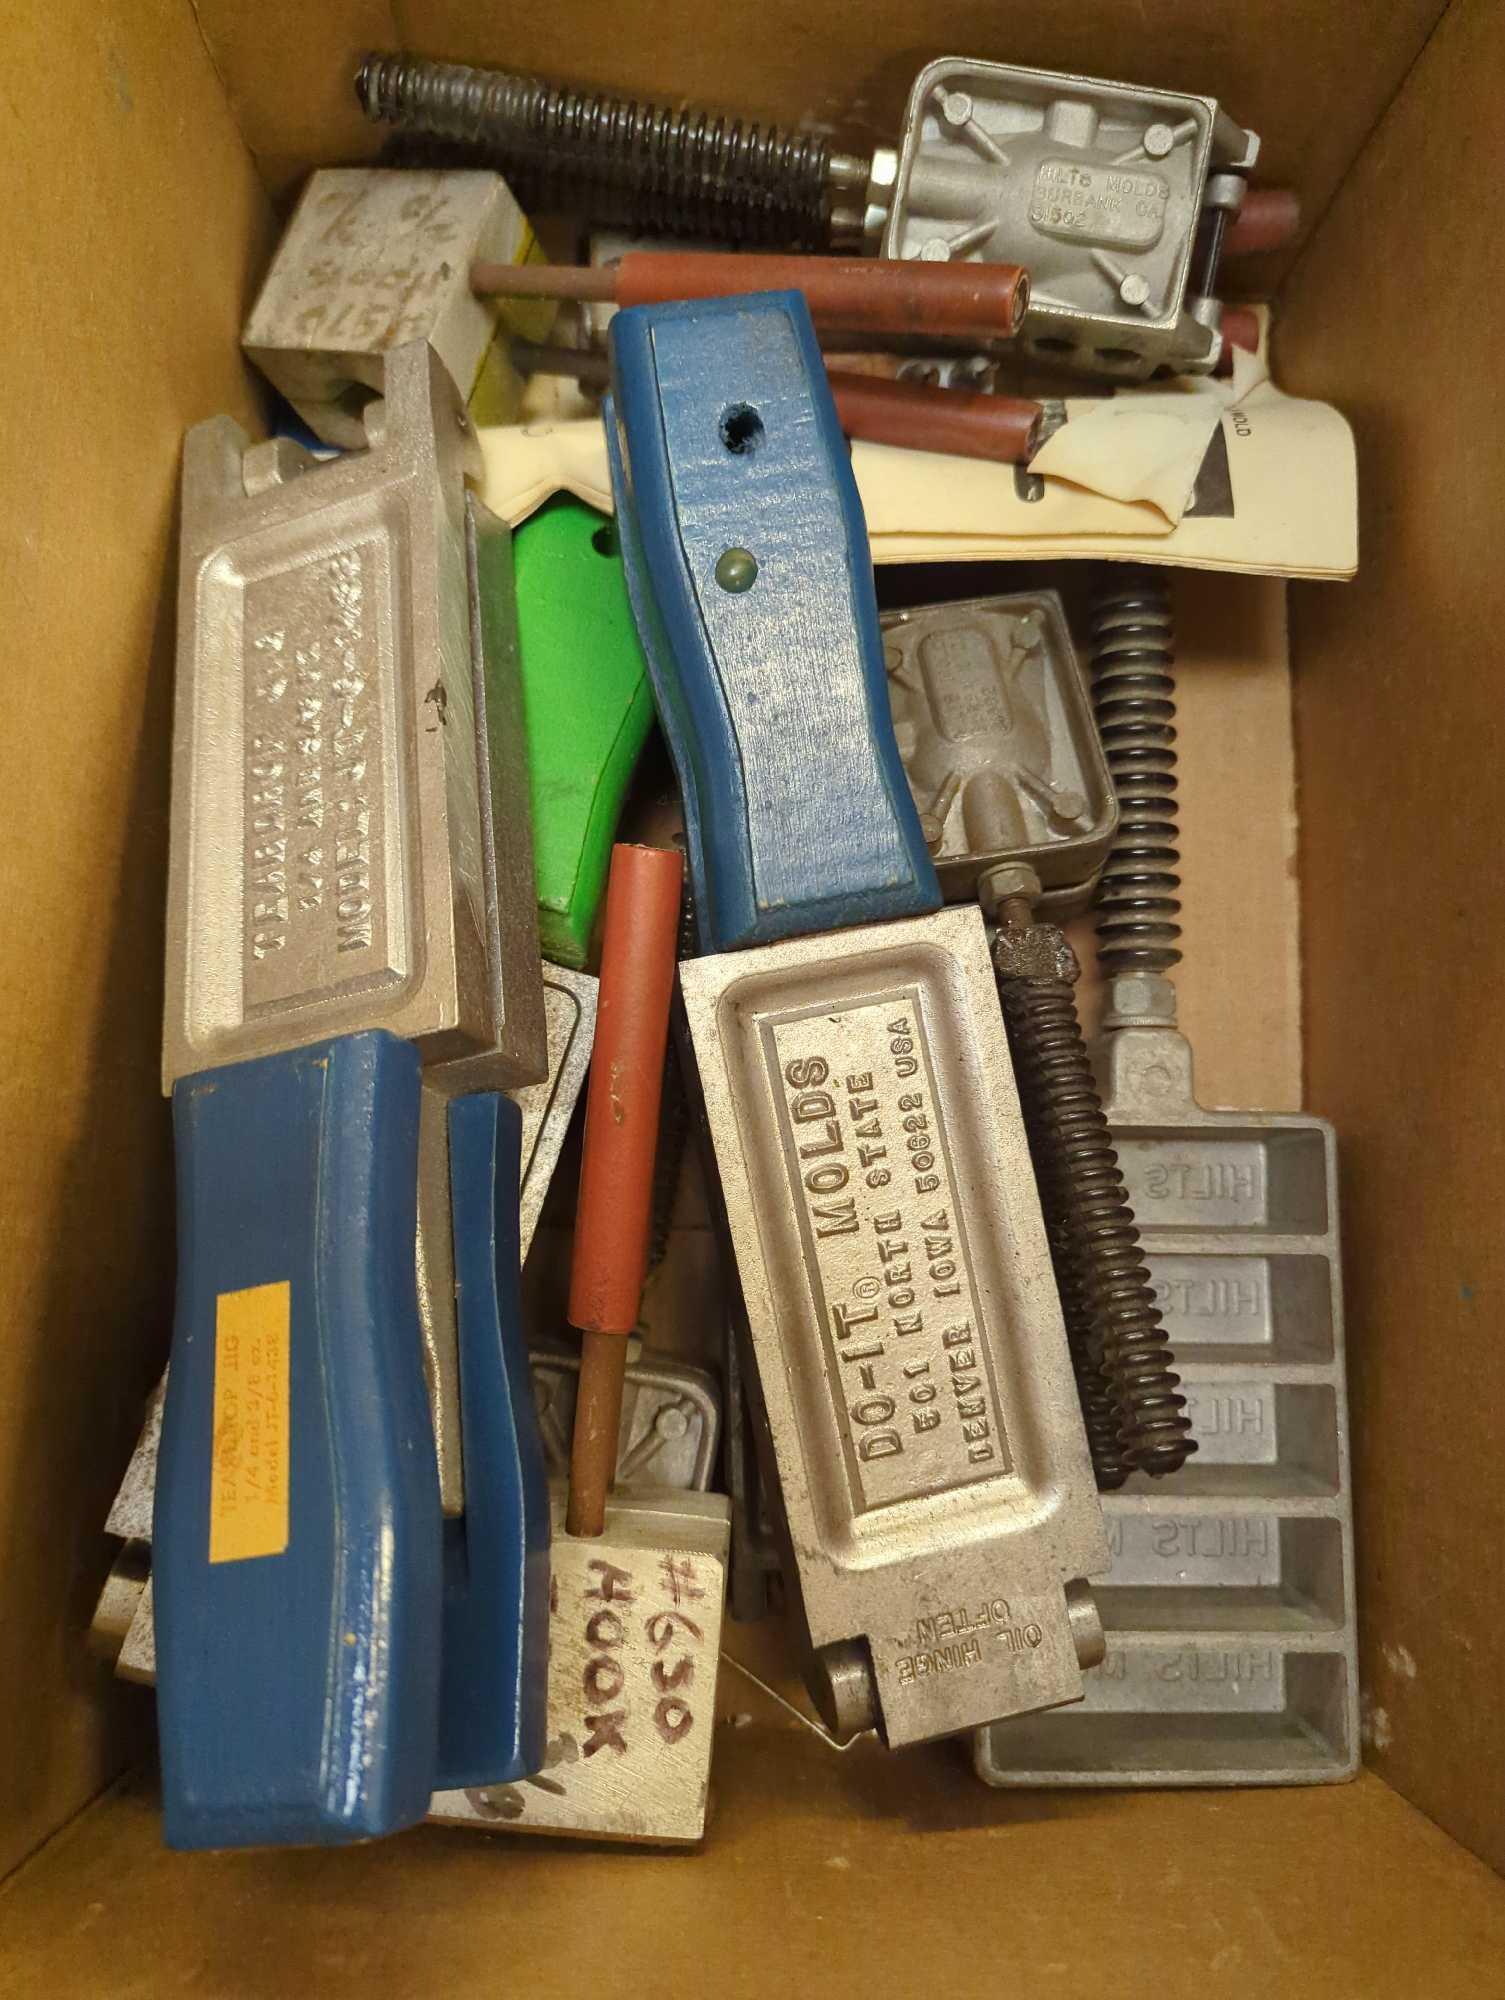 Box of assorted Do-It metal sinker and jig molds. Comes as is shown in photos. Appears to be used.